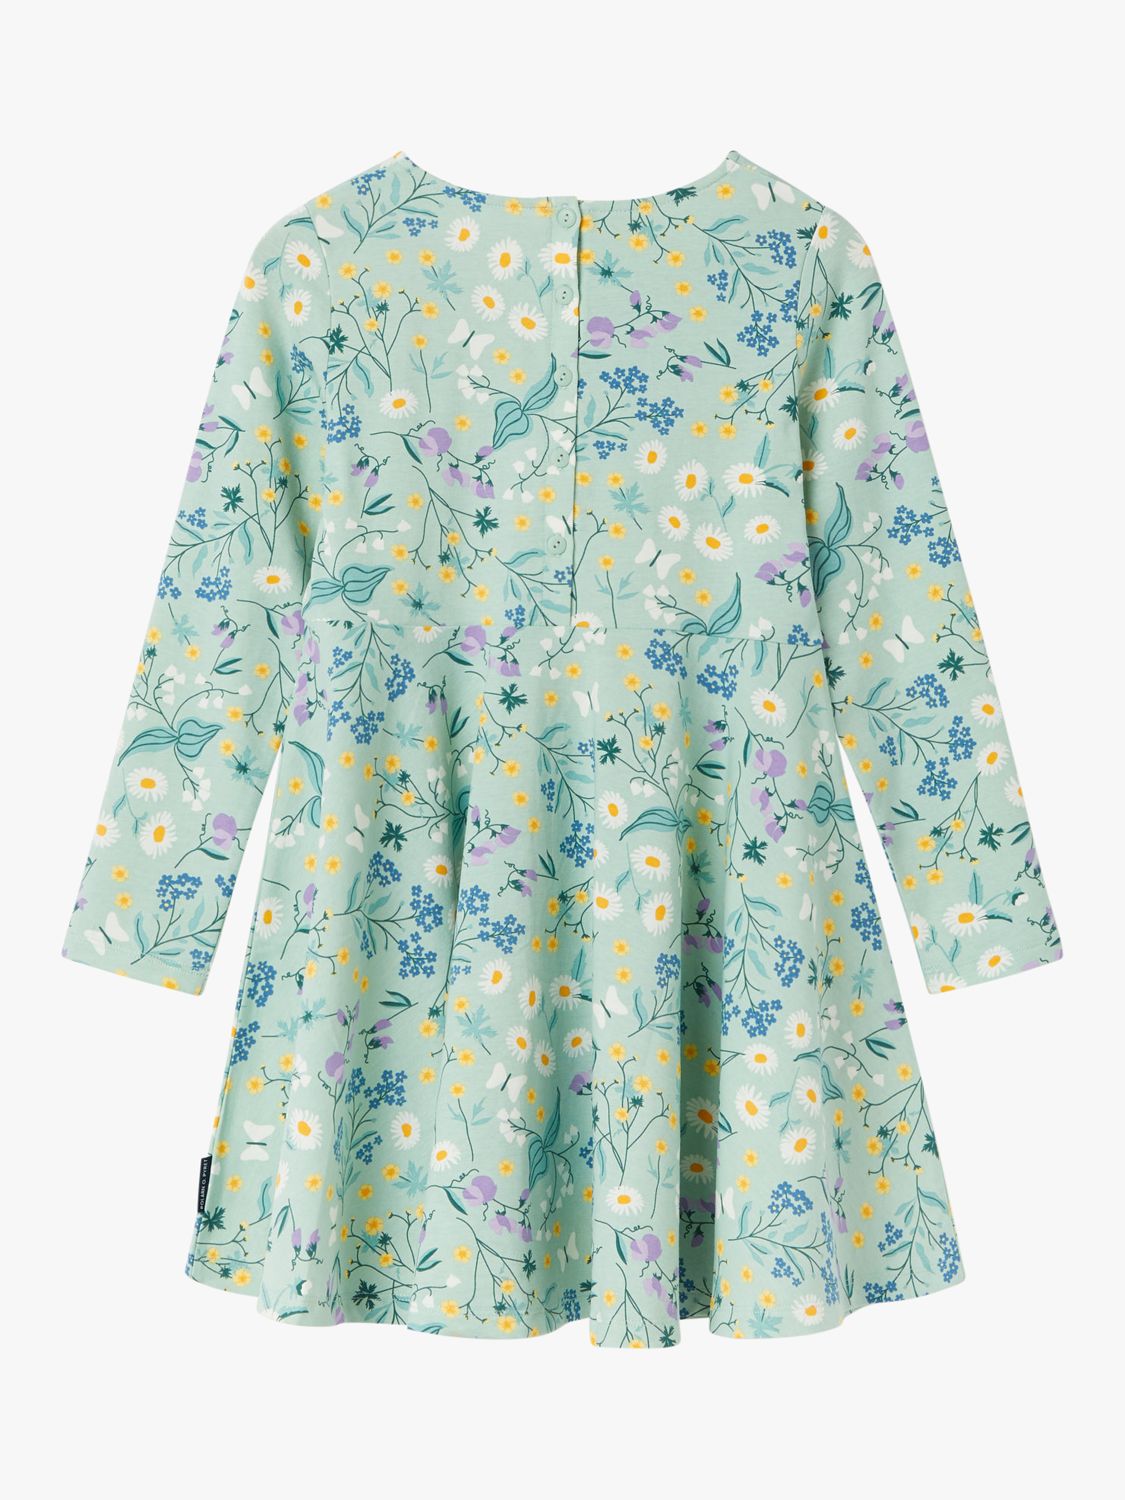 Buy Polarn O. Pyret Baby Floral Pleated Dress, Blue Online at johnlewis.com